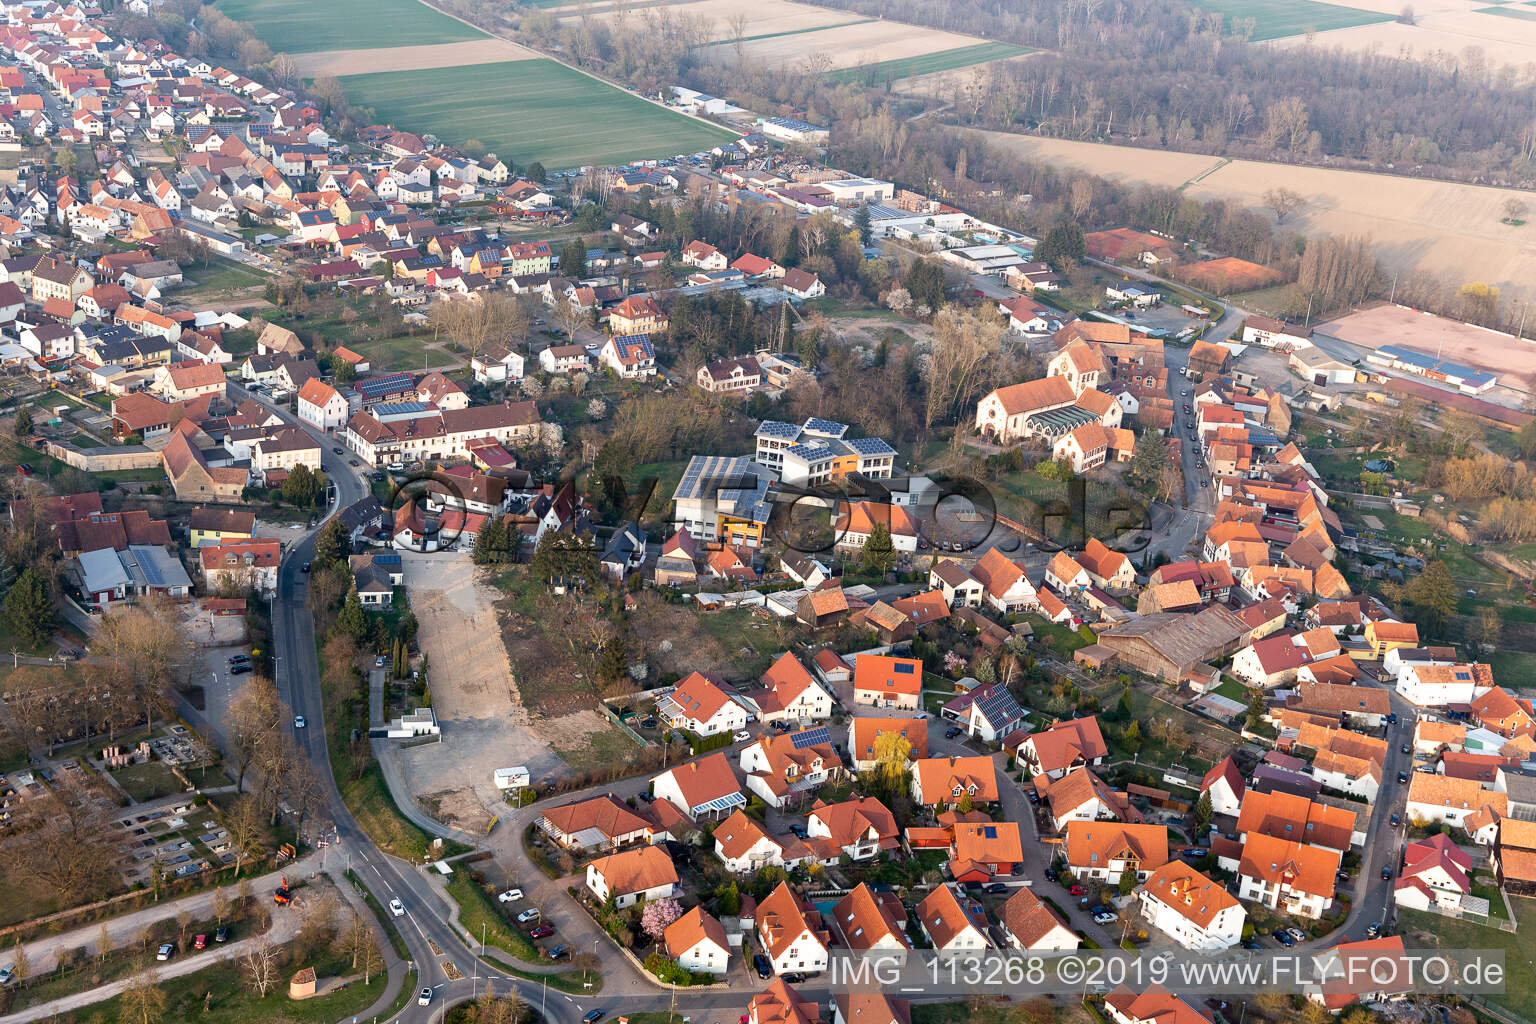 Hördt in the state Rhineland-Palatinate, Germany seen from a drone